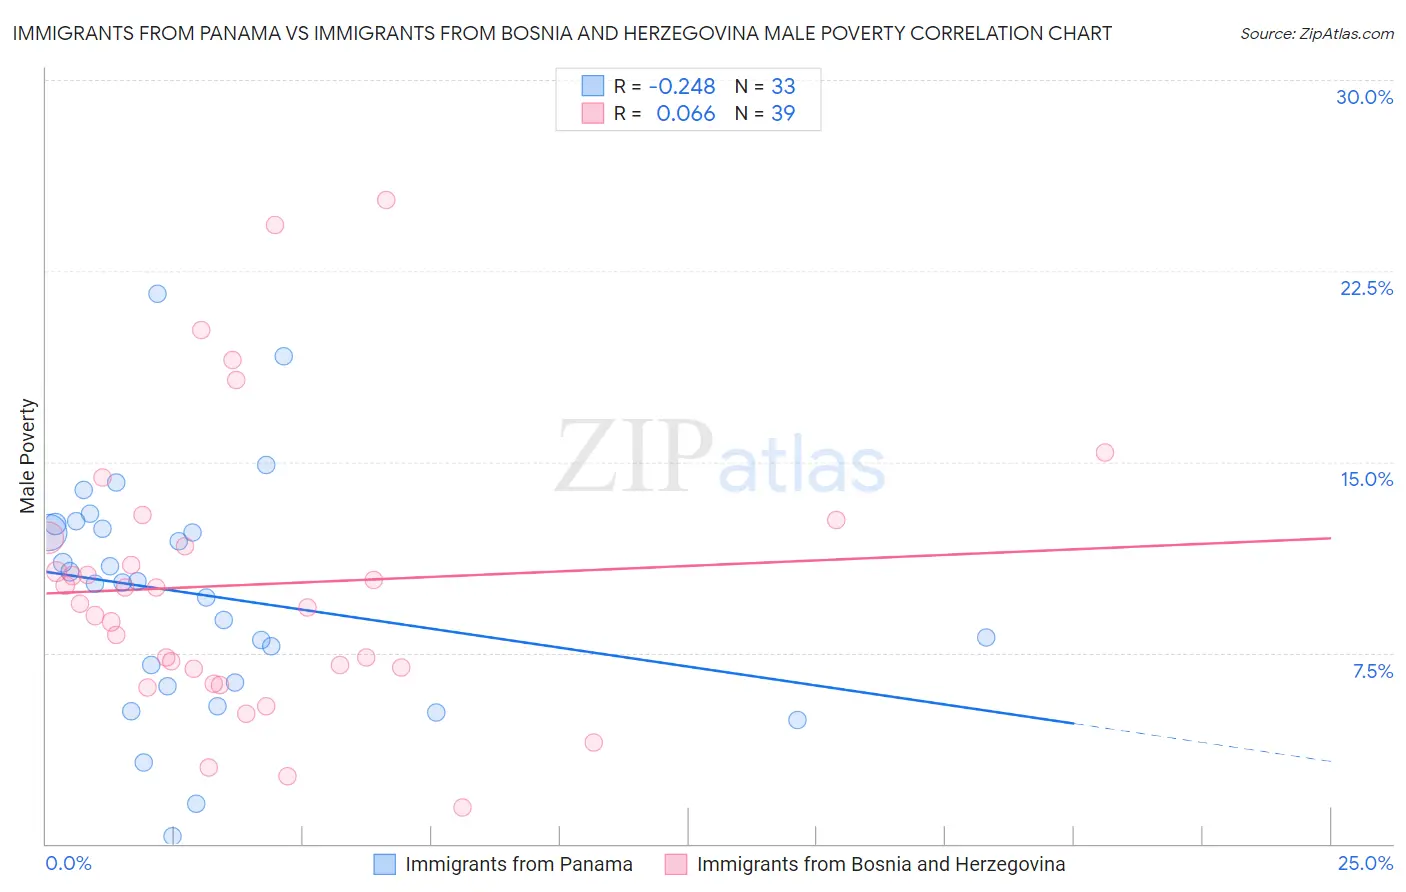 Immigrants from Panama vs Immigrants from Bosnia and Herzegovina Male Poverty